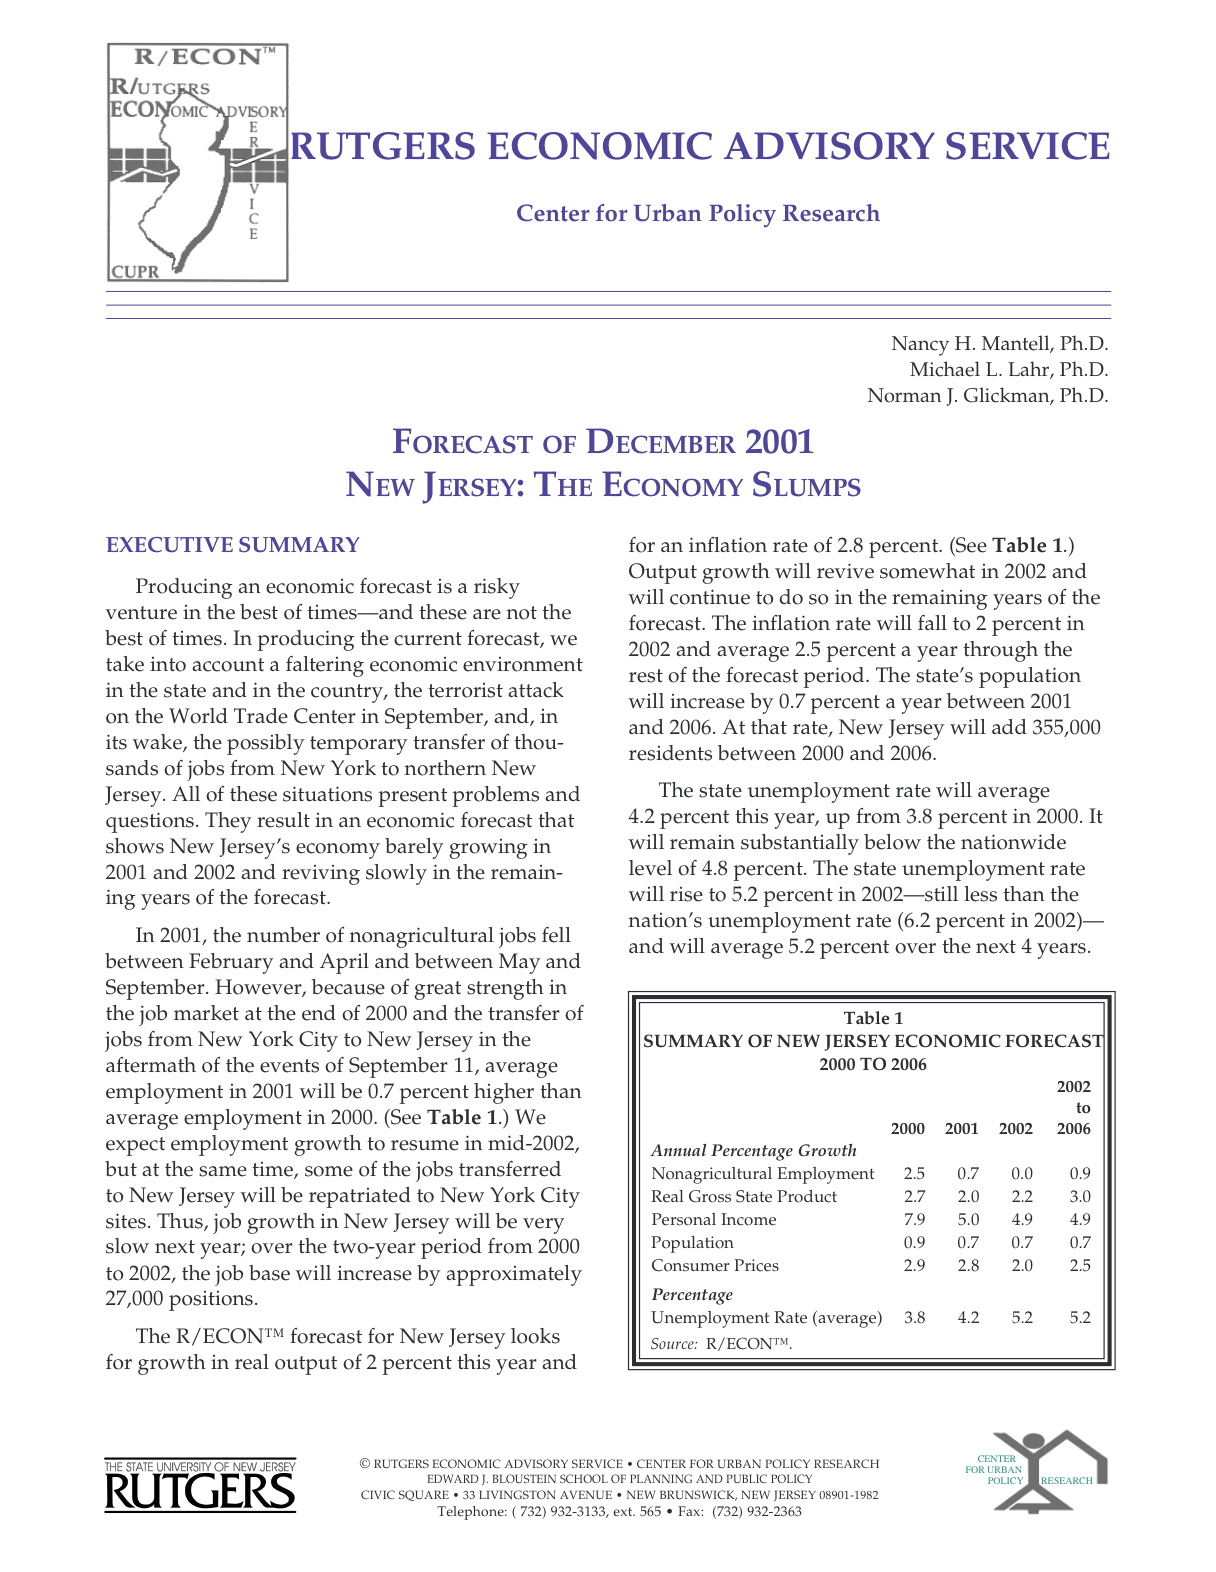 Forecast of December 2001 New Jersey